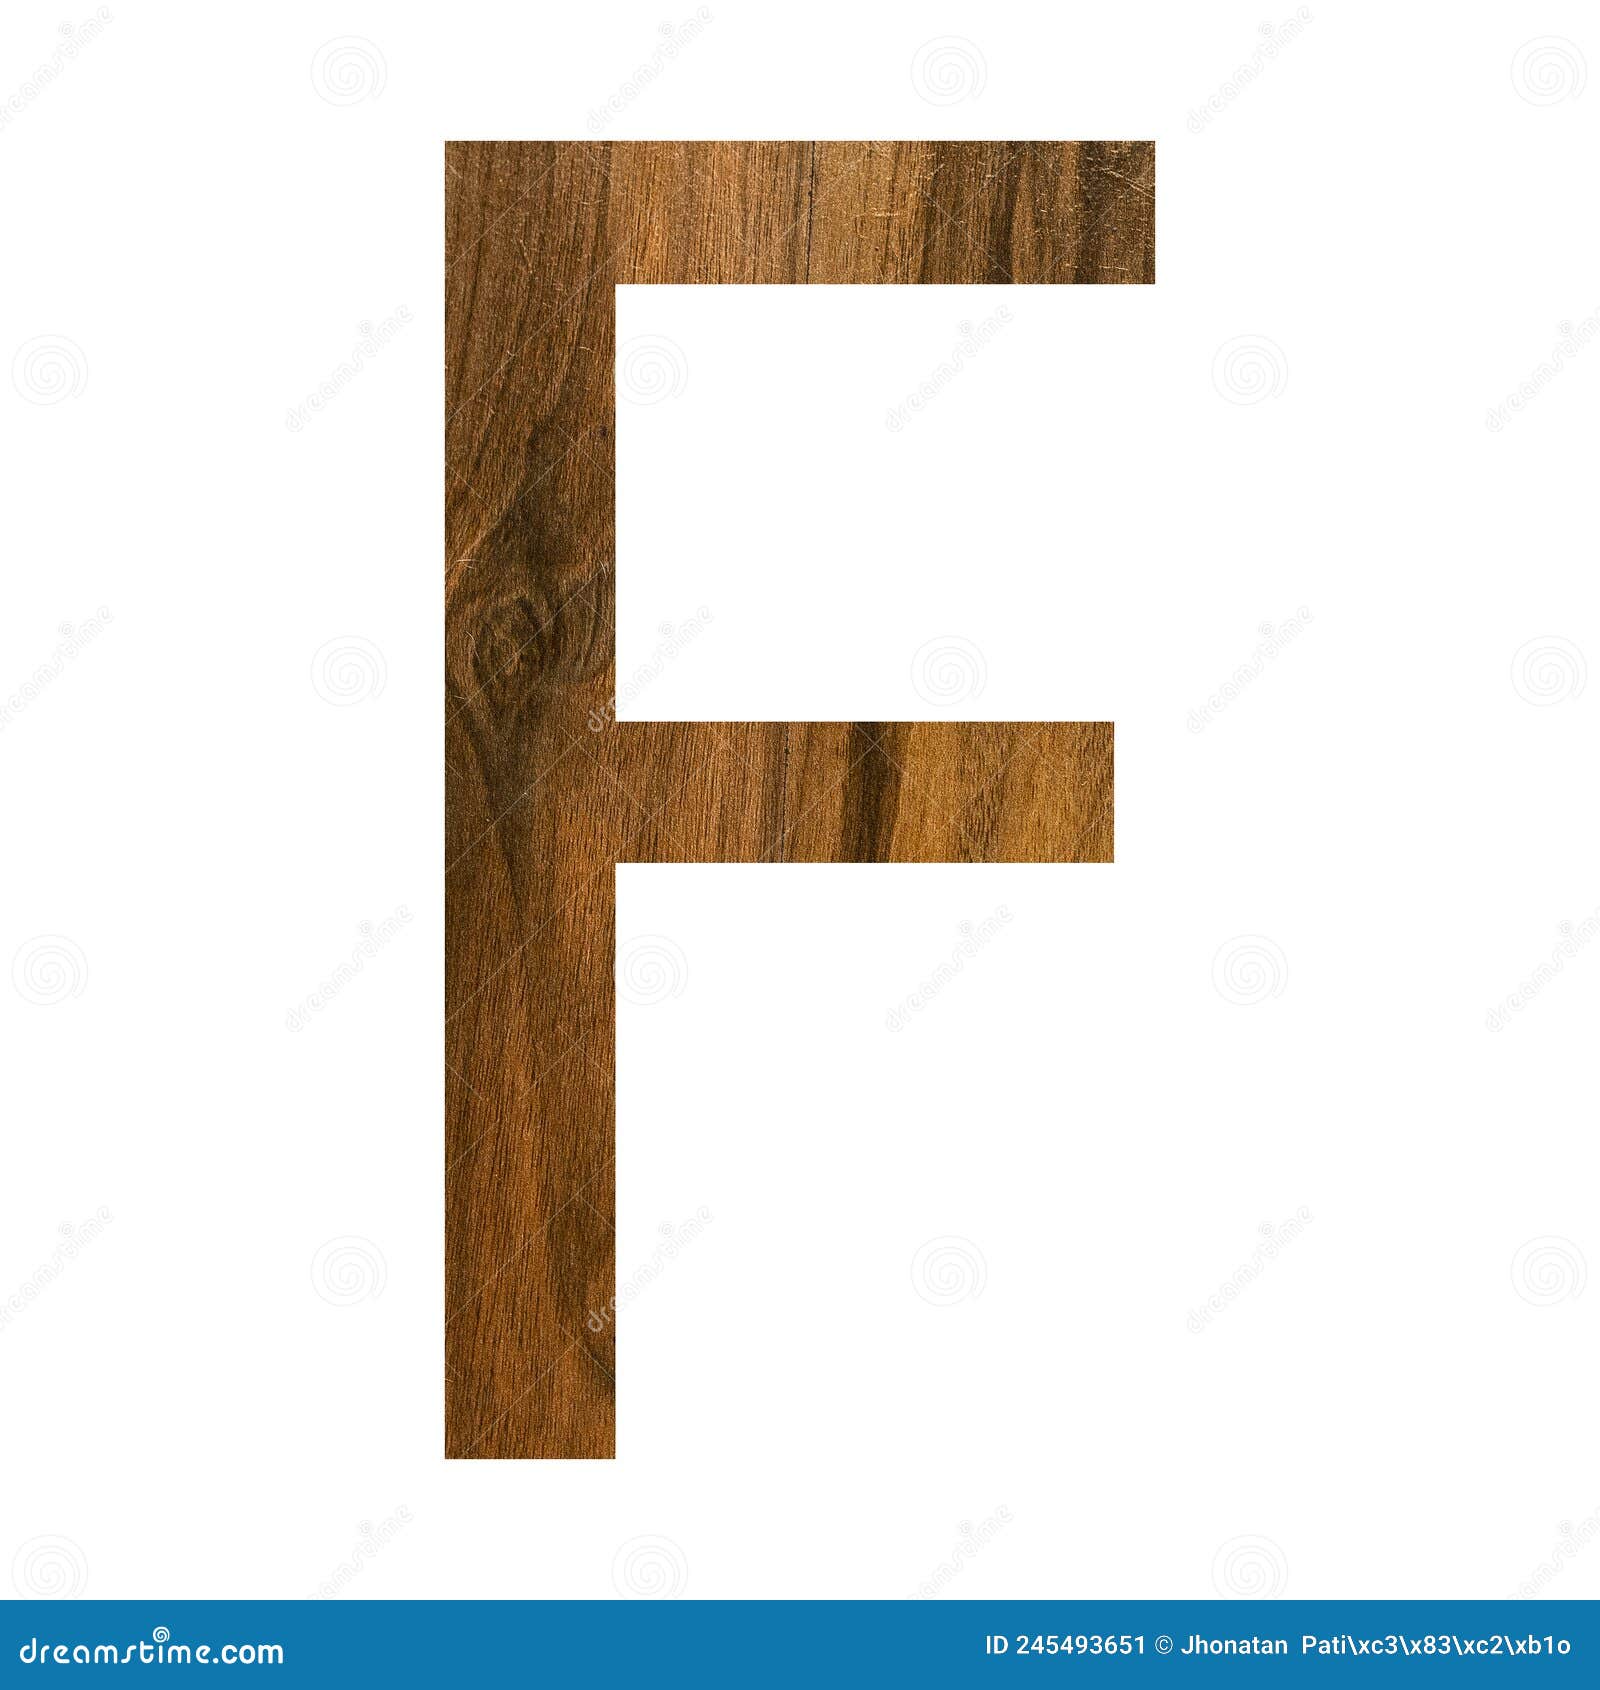 Letter F in Wood Texture - White Background Stock Image - Image of type ...